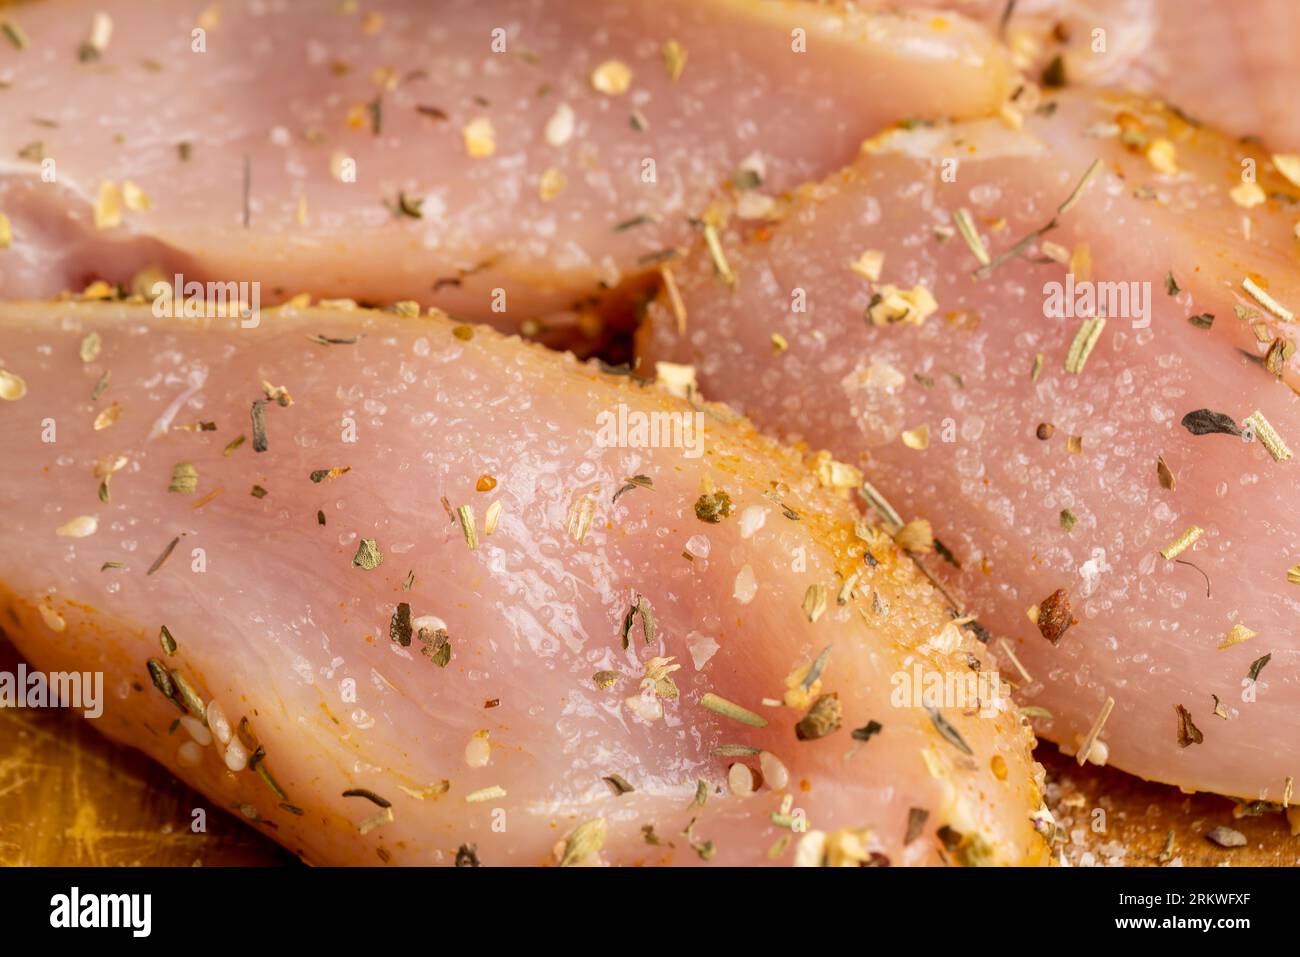 Freshly washed and skinned chicken meat, chicken fillets with salt and spices ready for cooking Stock Photo